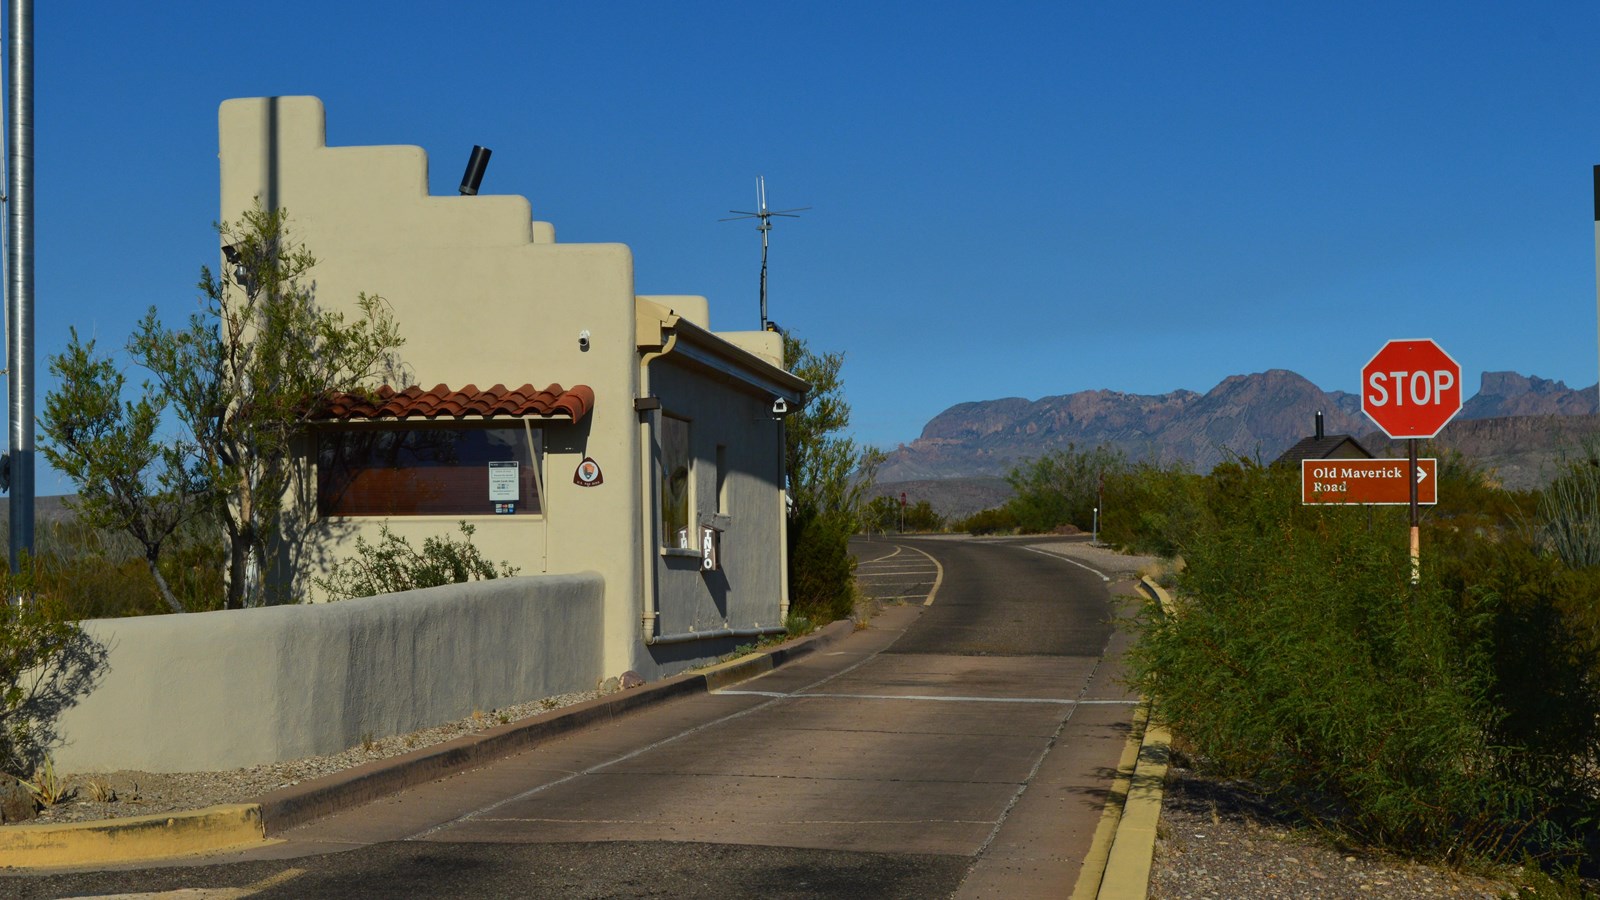 A small adobe building sits between two lanes of highway, with a flagpole and stop sign nearby.